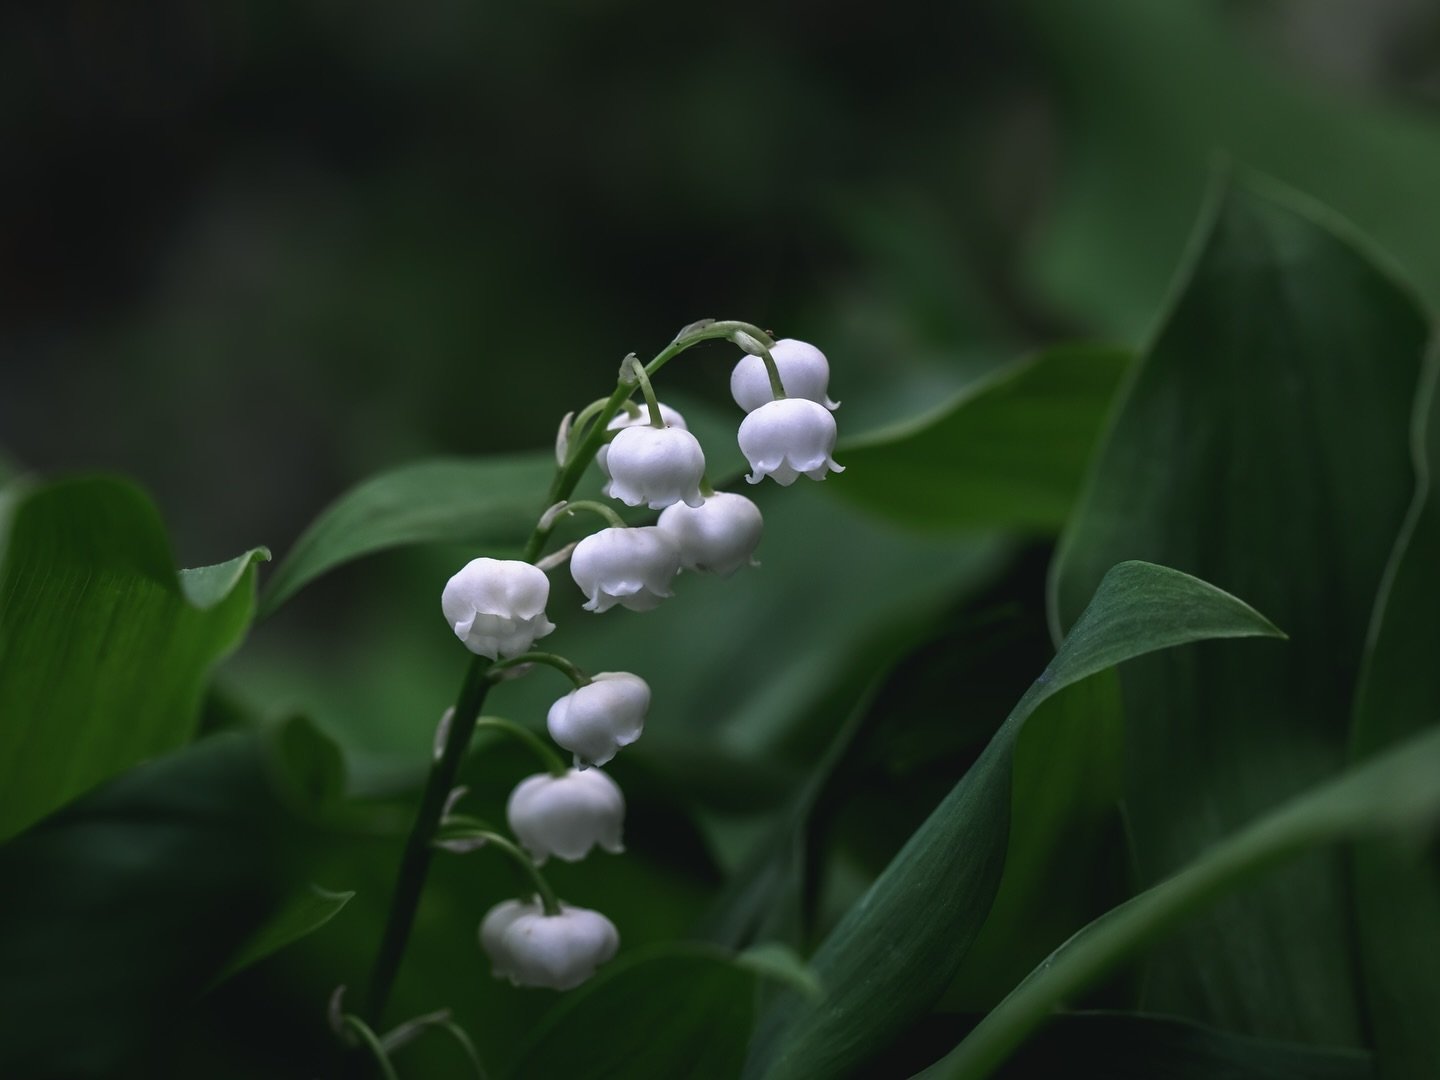 How is it May?! This year is flying. In France, Lily of the Valley is traditionally gifted to loved ones on May Day (&lsquo;La F&ecirc;te du Muguet&rsquo;) to symbolise good luck and love. Here, I have them growing in the garden and they have quite p